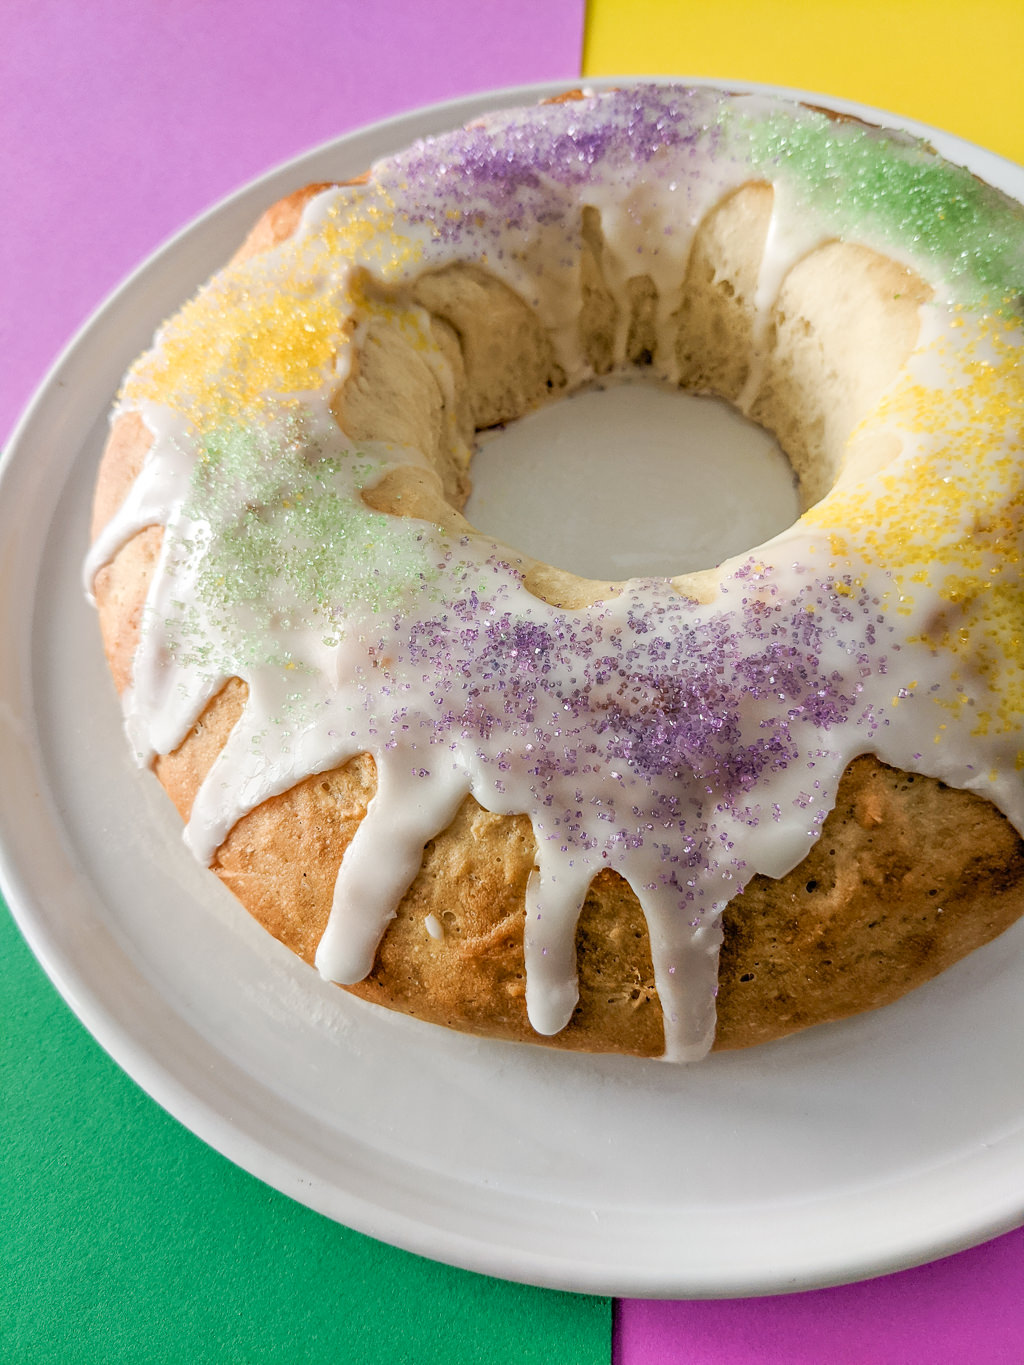 King Cake with green, yellow, and purple decorations Mardi Gras